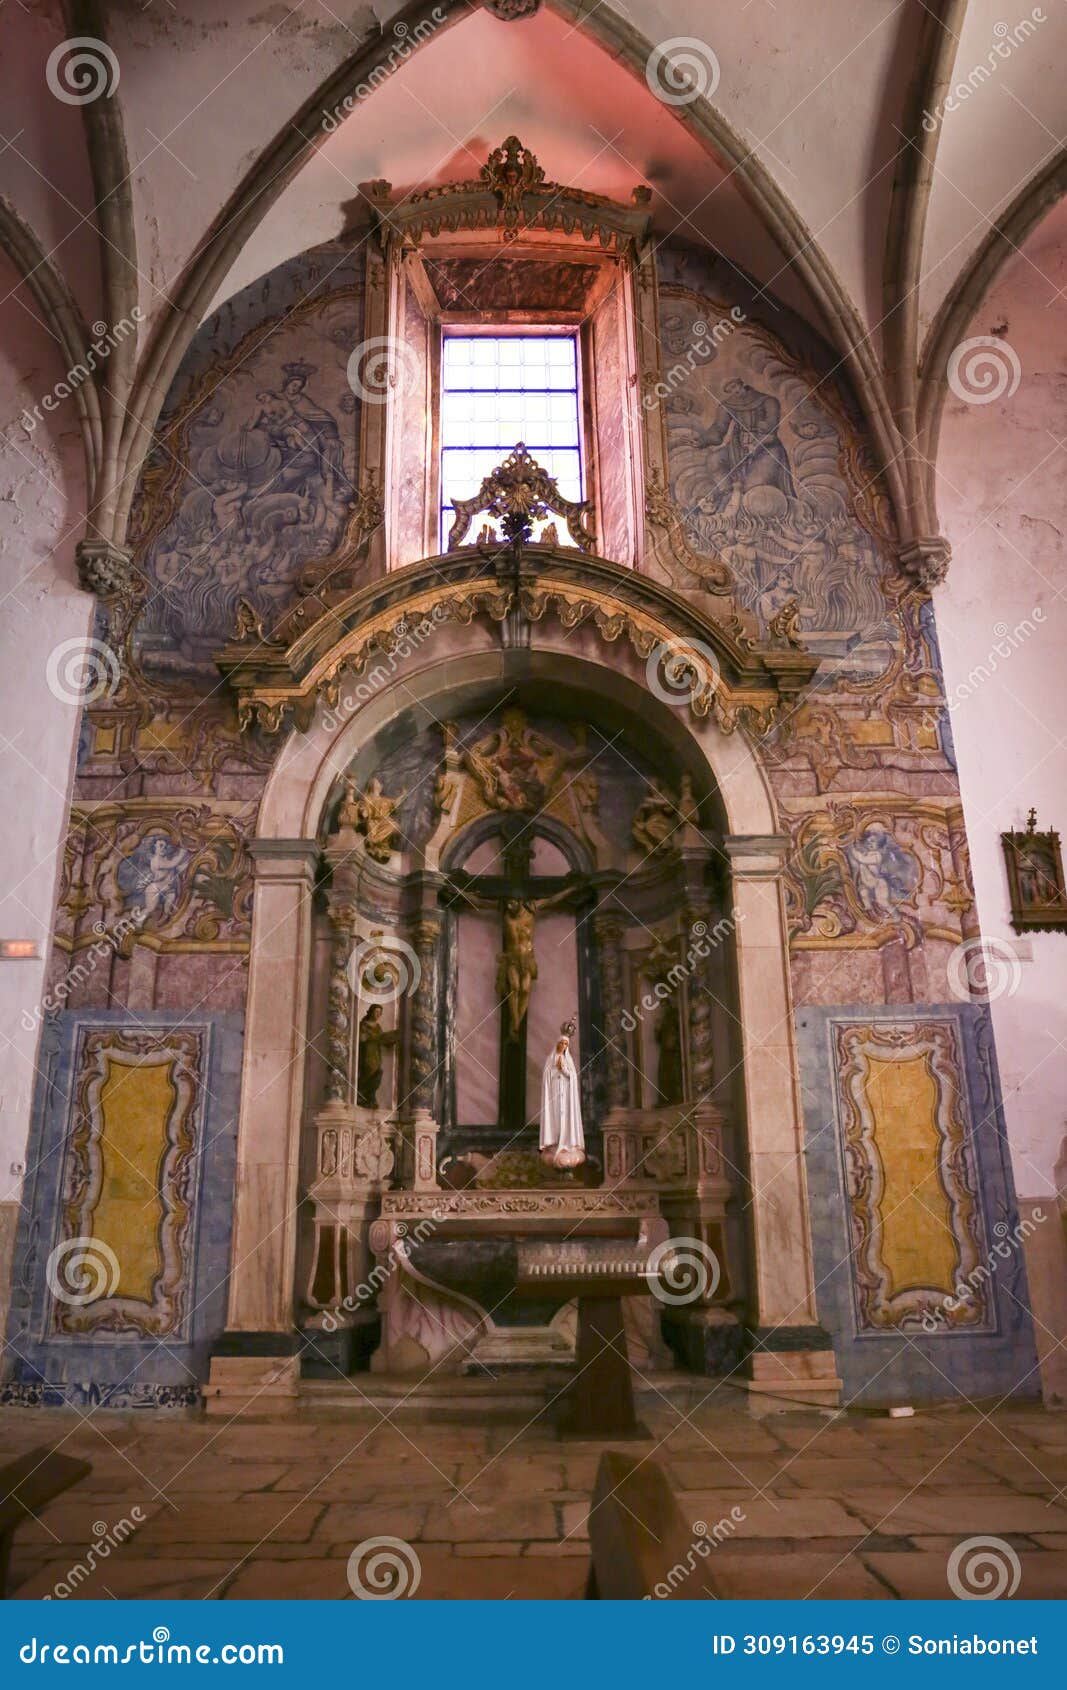 altar of saint mary magdalene church in olivenza town